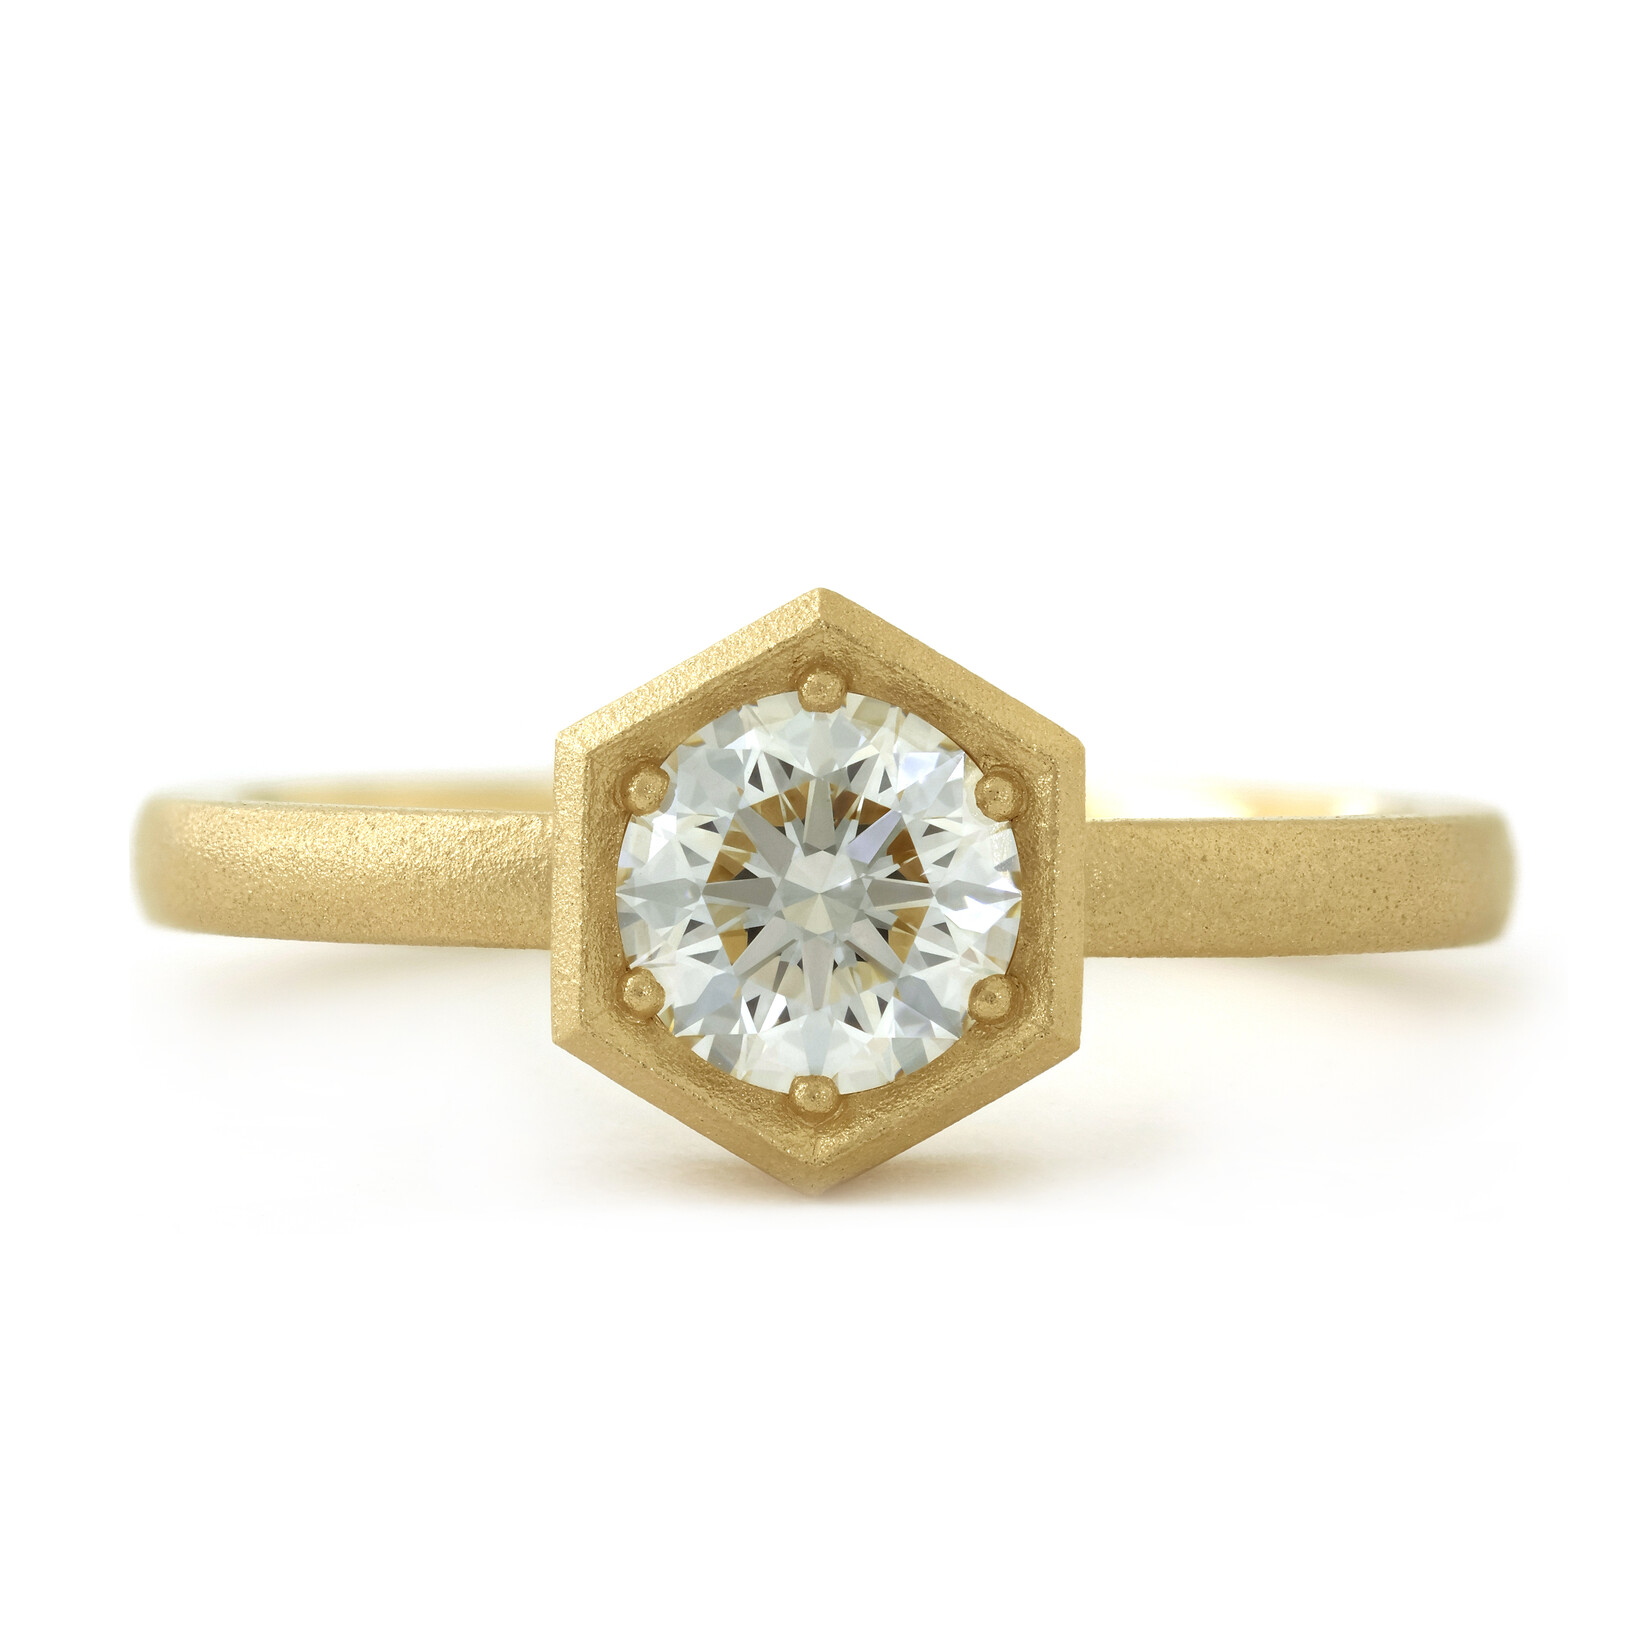 Baxter Moerman Hex Solitaire Diamond Ring